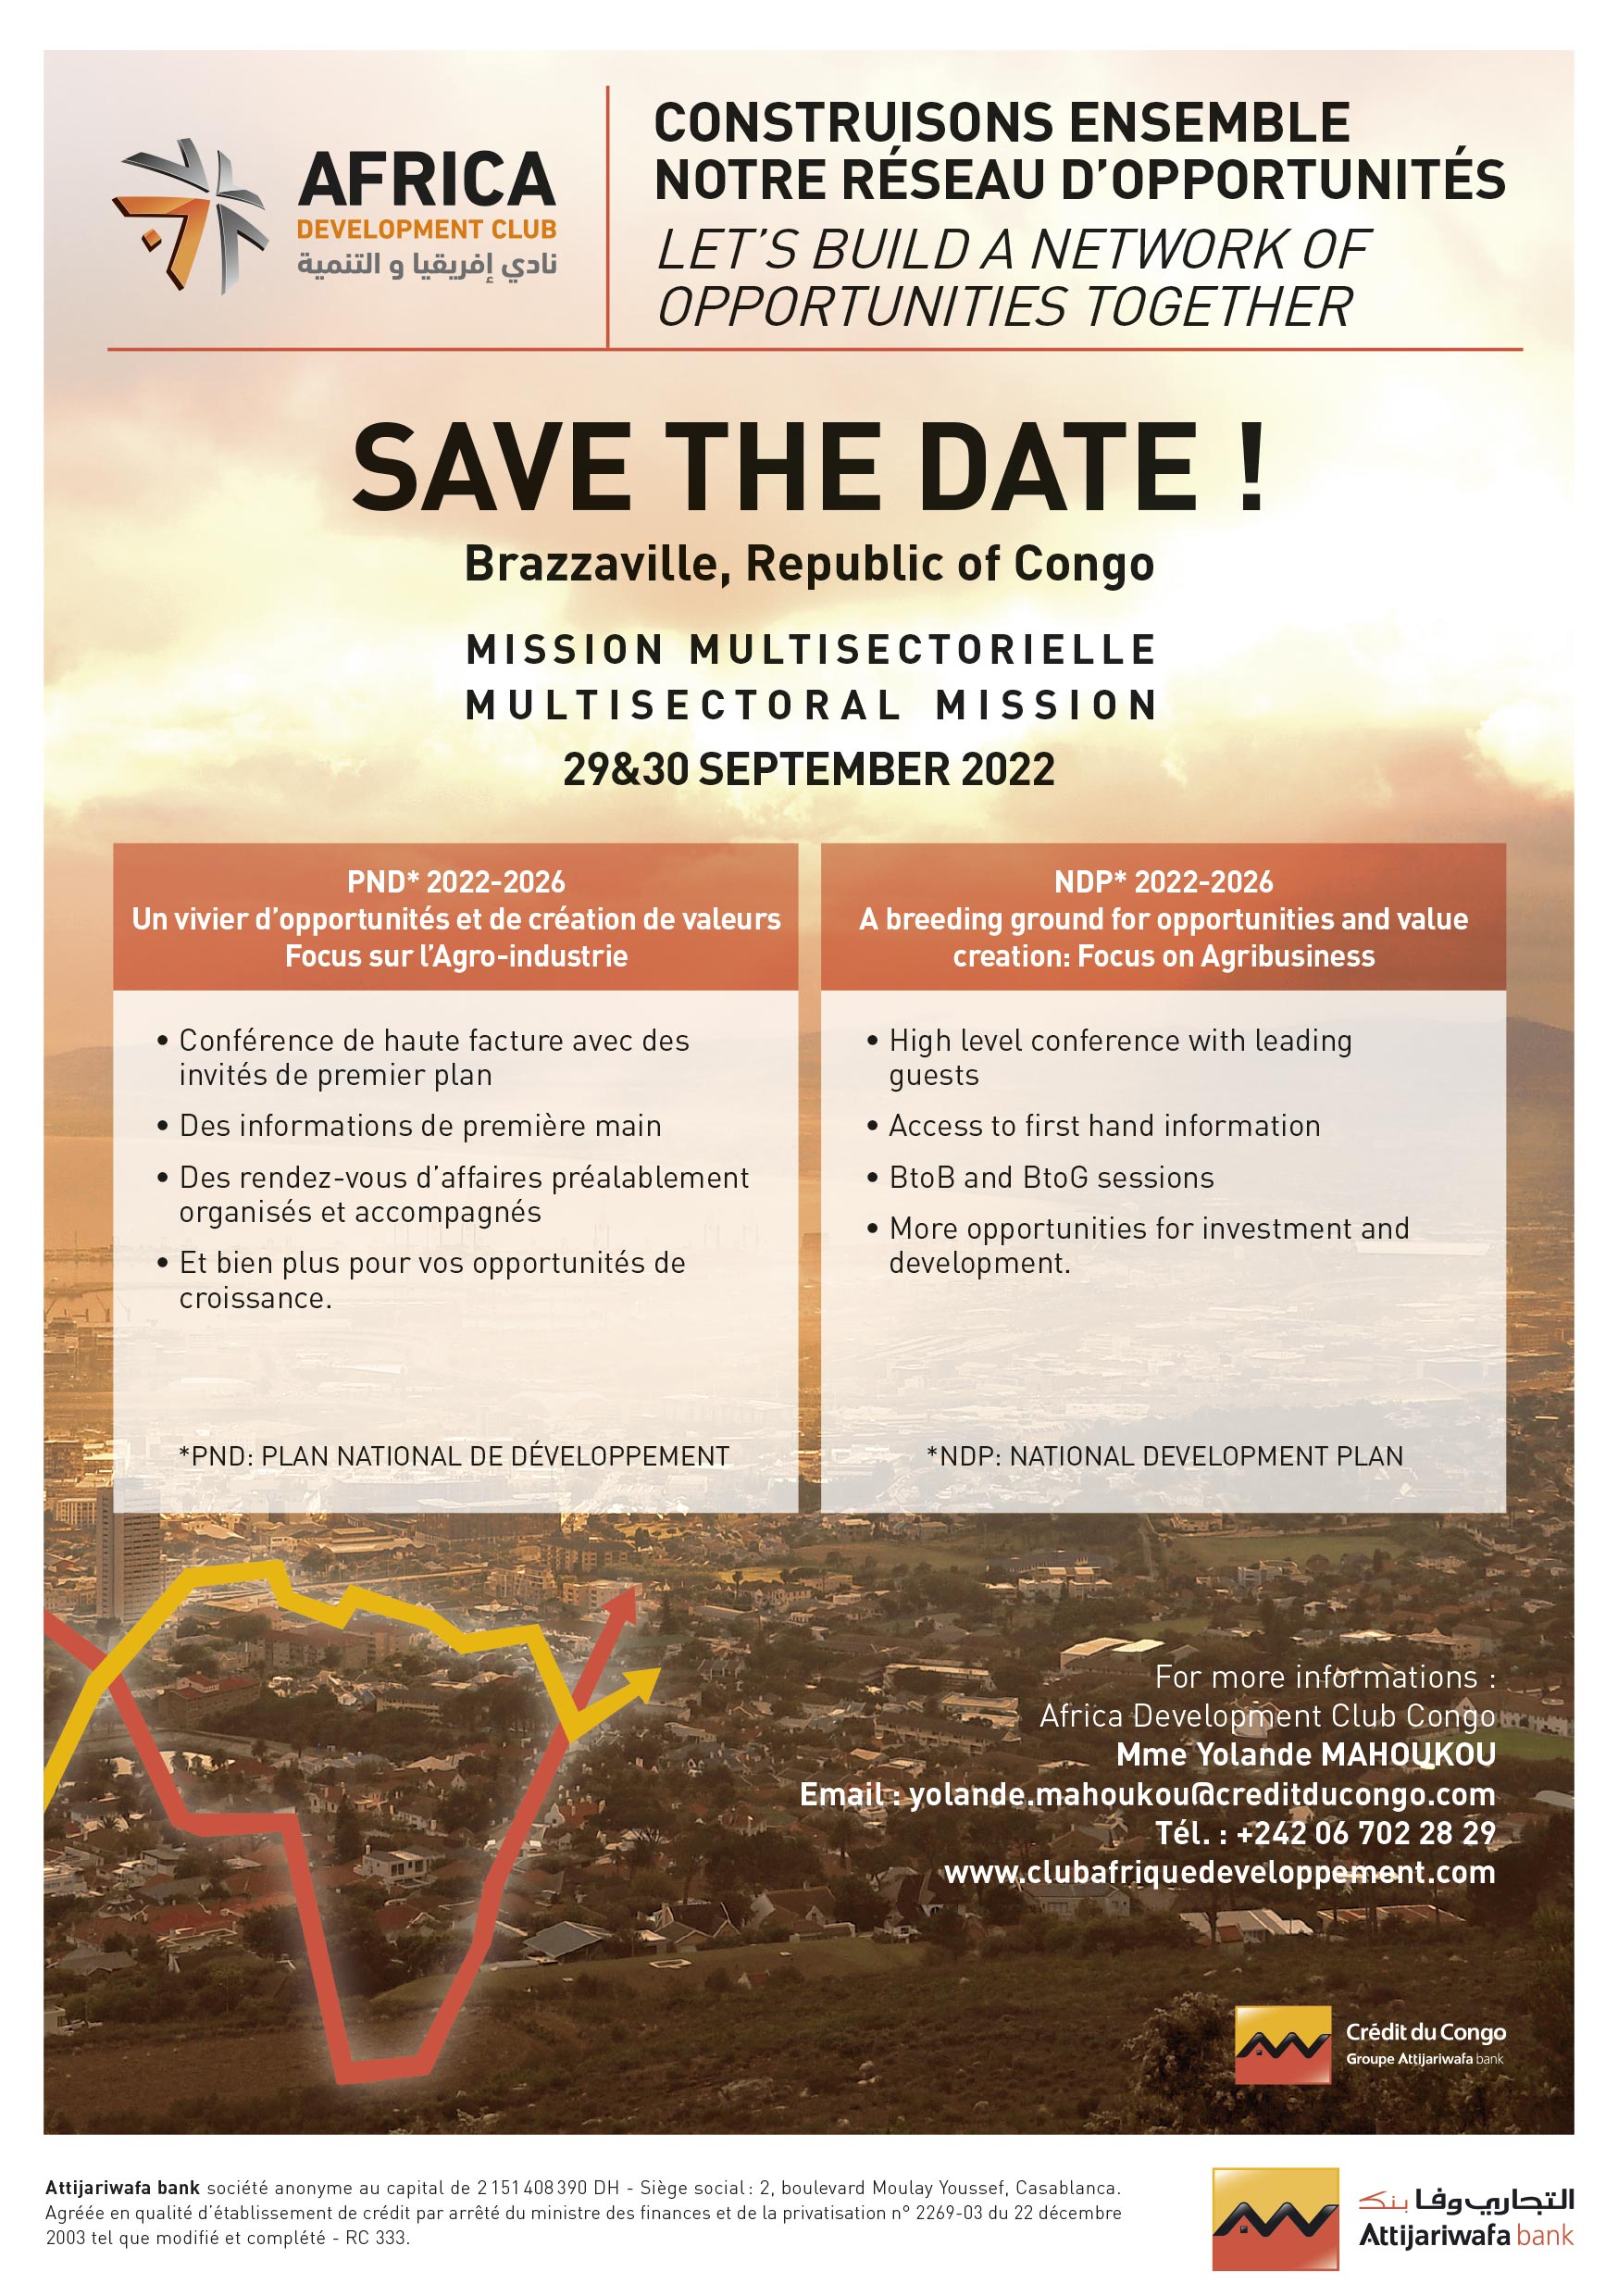 Save the Date! Multisectoral Mission Congo